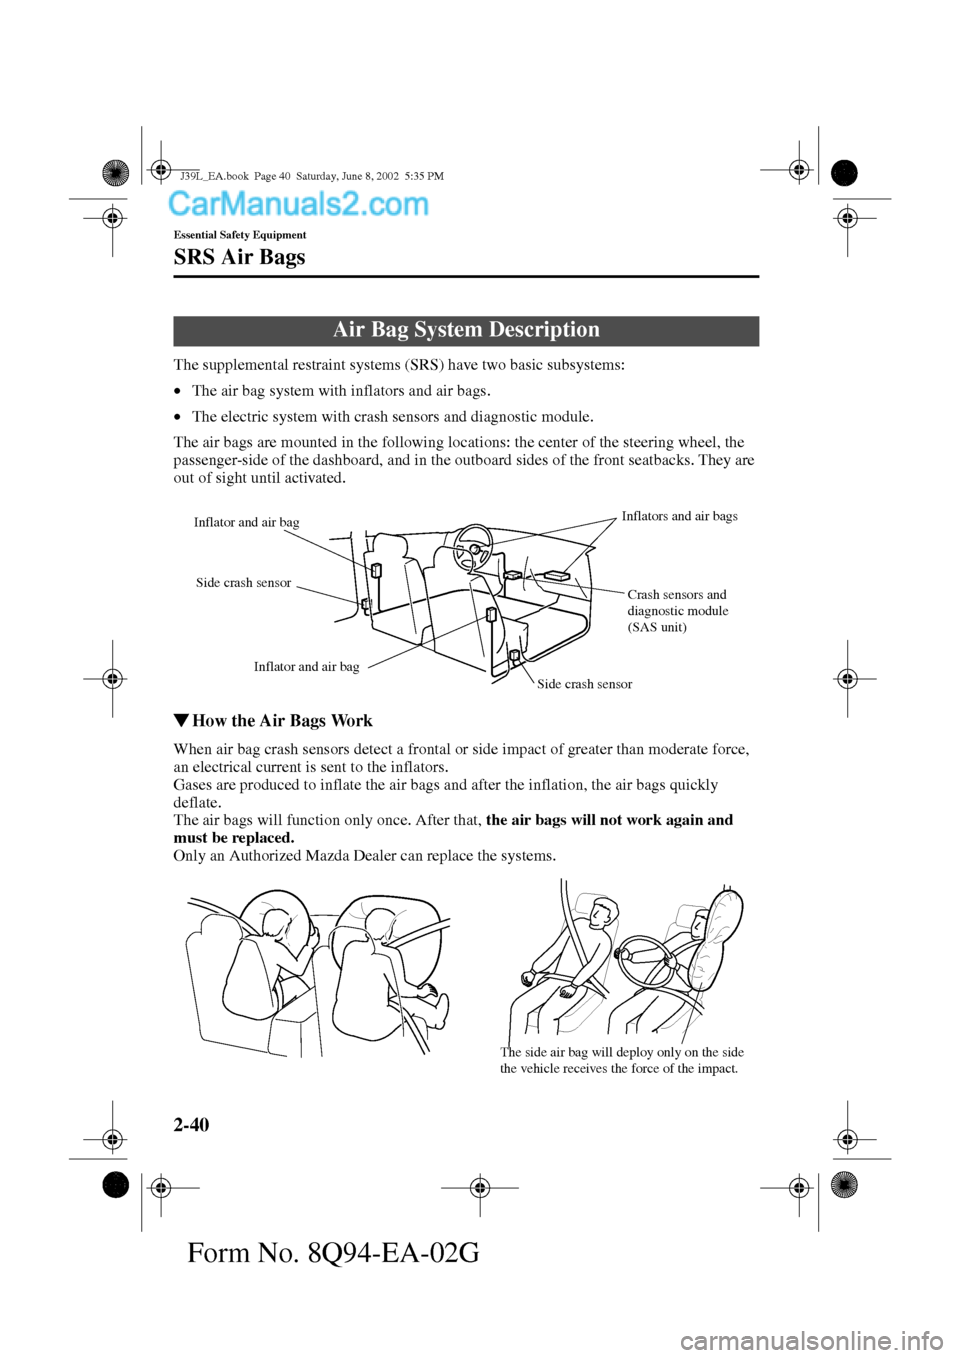 MAZDA MODEL PROTÉGÉ 2003  Owners Manual (in English) 2-40
Essential Safety Equipment
SRS Air Bags
Form No. 8Q94-EA-02G
The supplemental restraint systems (SRS) have two basic subsystems:
•The air bag system with inflators and air bags.
•The electric